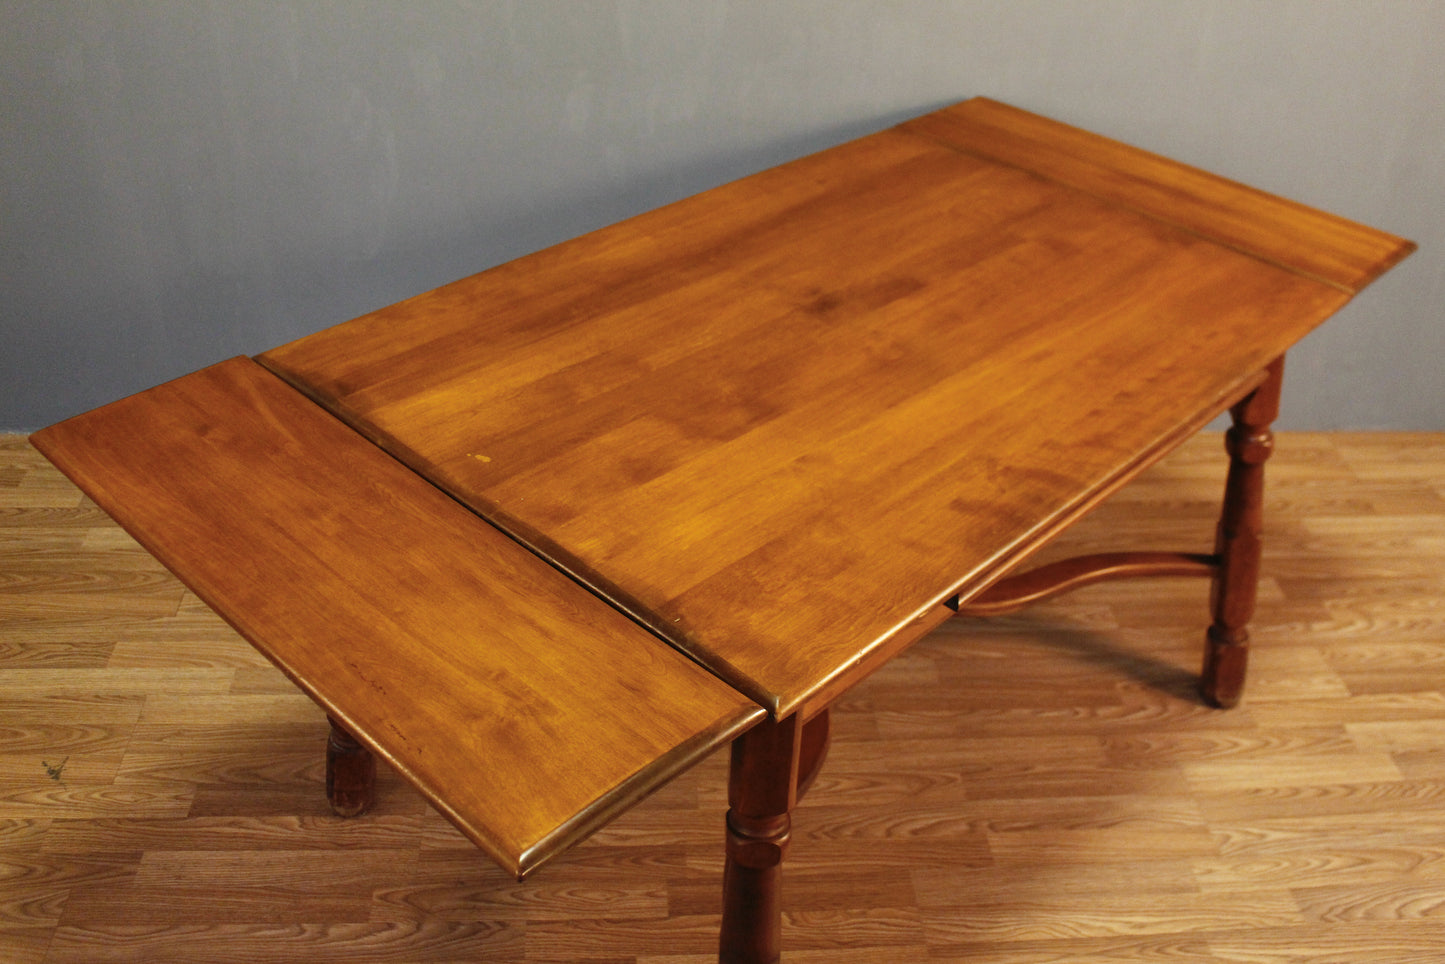 Maple Dining Table with Built-In Leaves - ONLINE ONLY